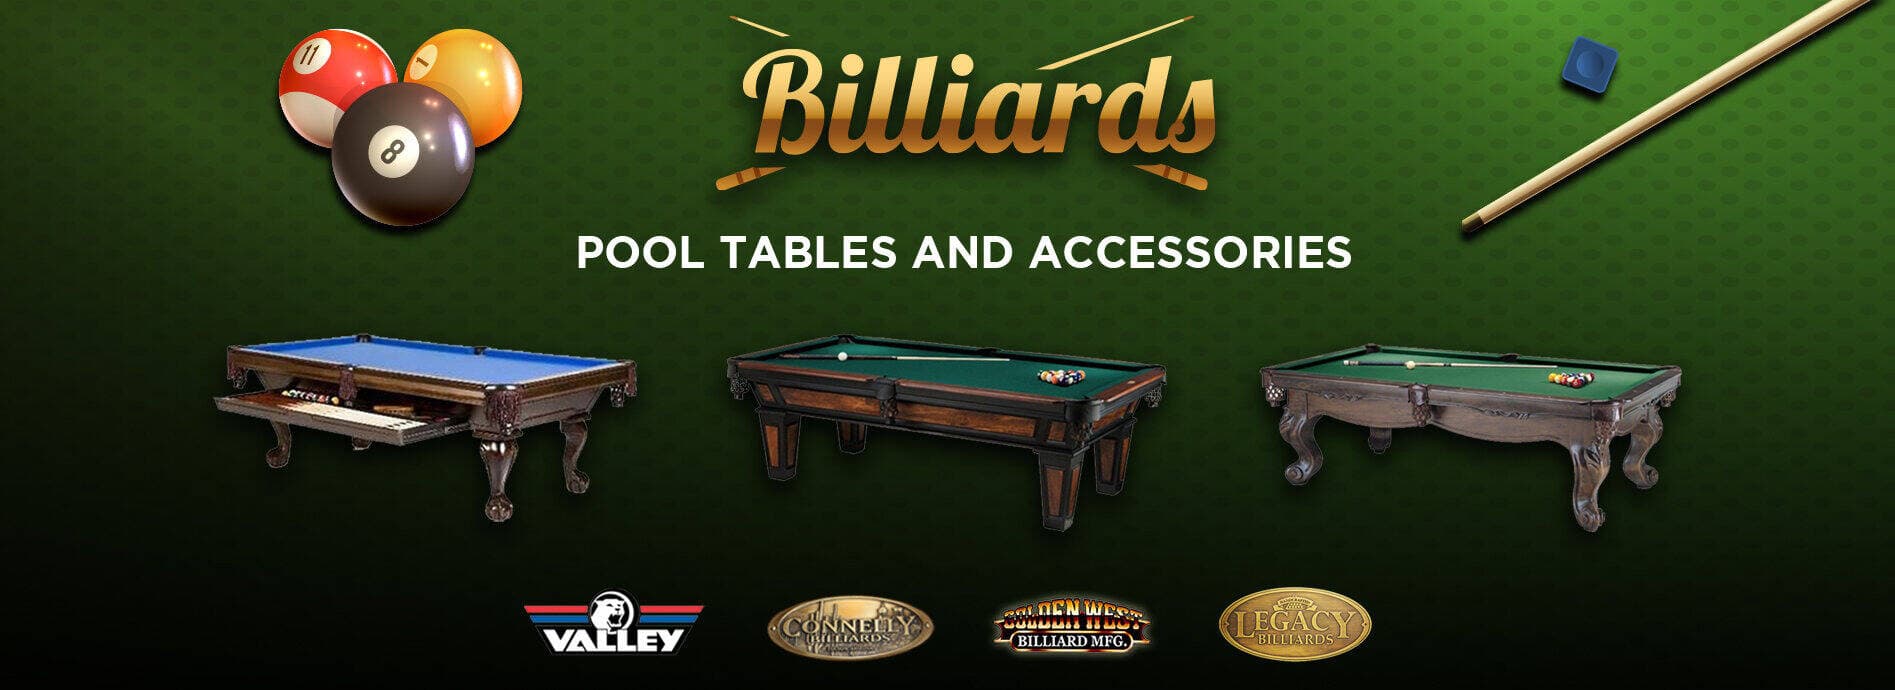 billiards and pool tables for sale in Denver at Game Exchange of Colorado